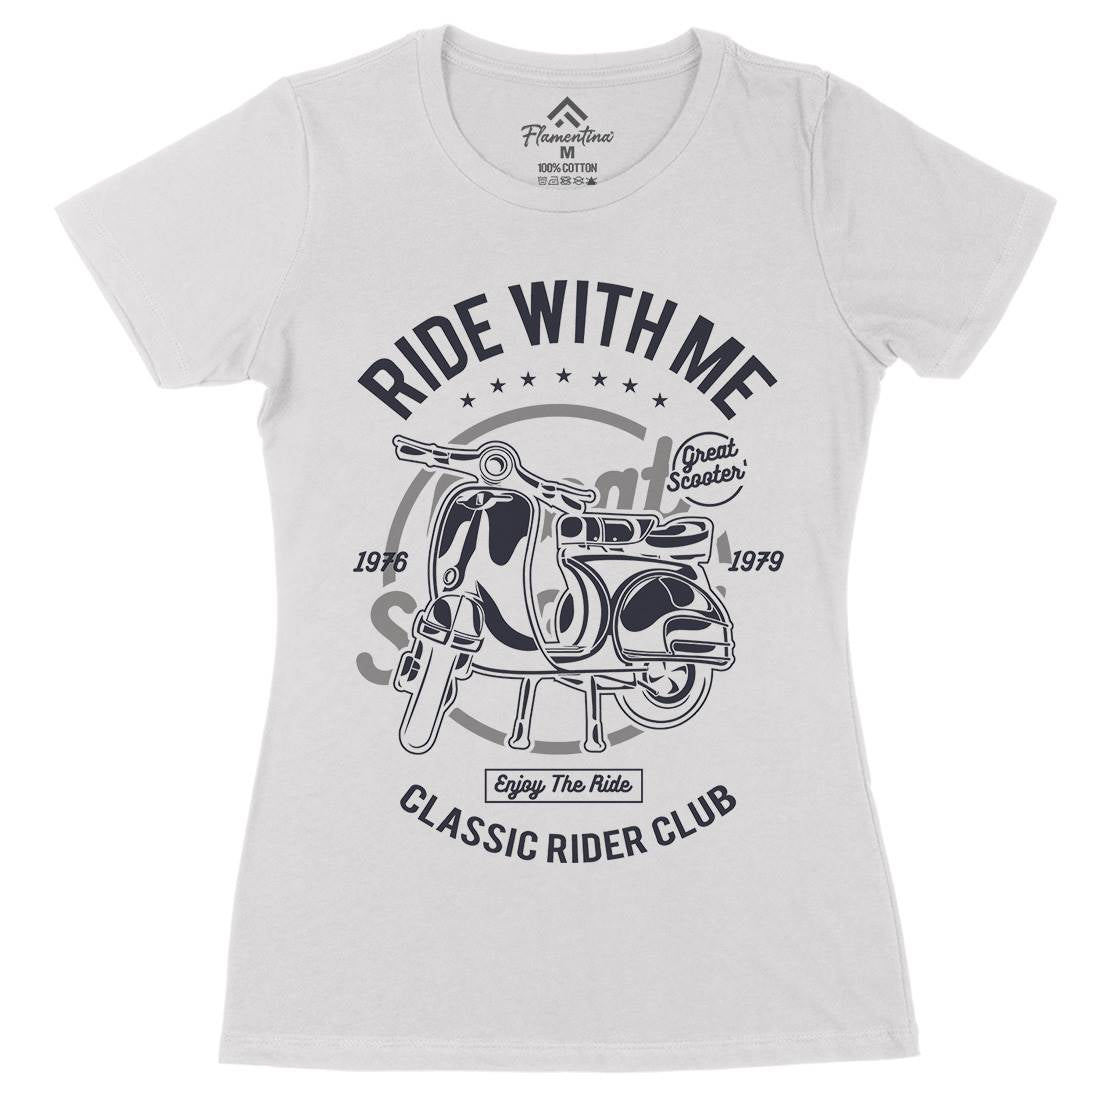 Ride With Me Womens Organic Crew Neck T-Shirt Motorcycles A120